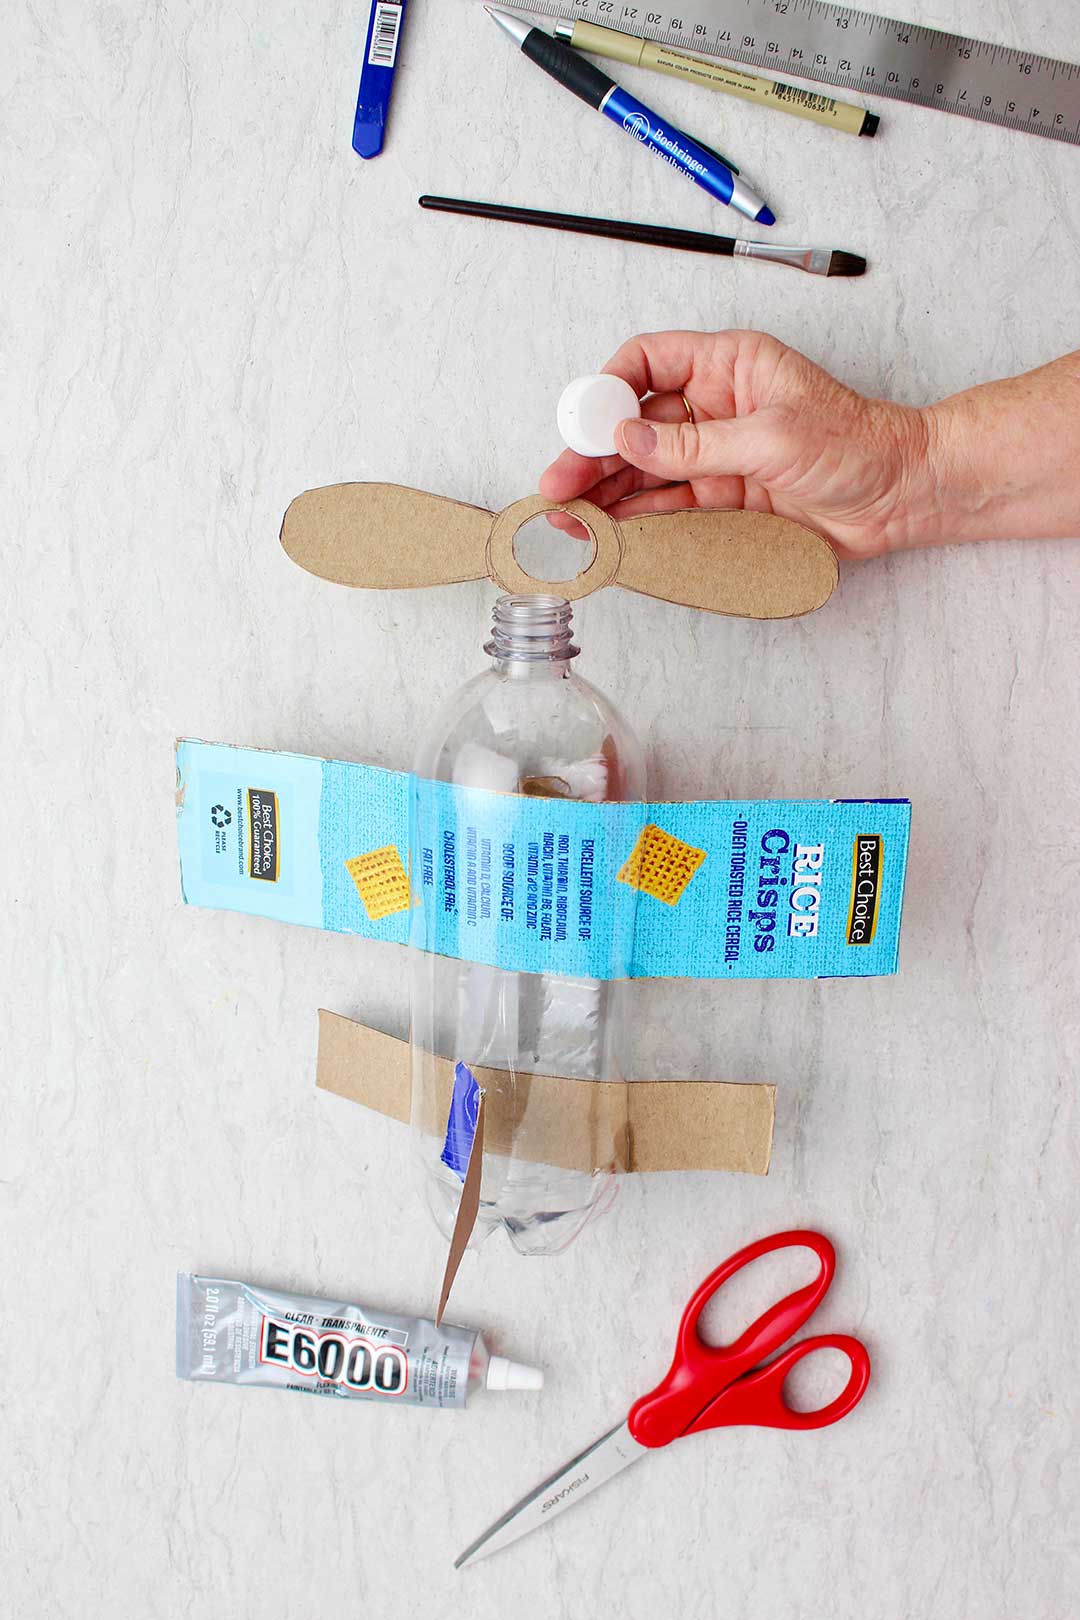 Hand attaching cardboard propellers to the bottle neck.